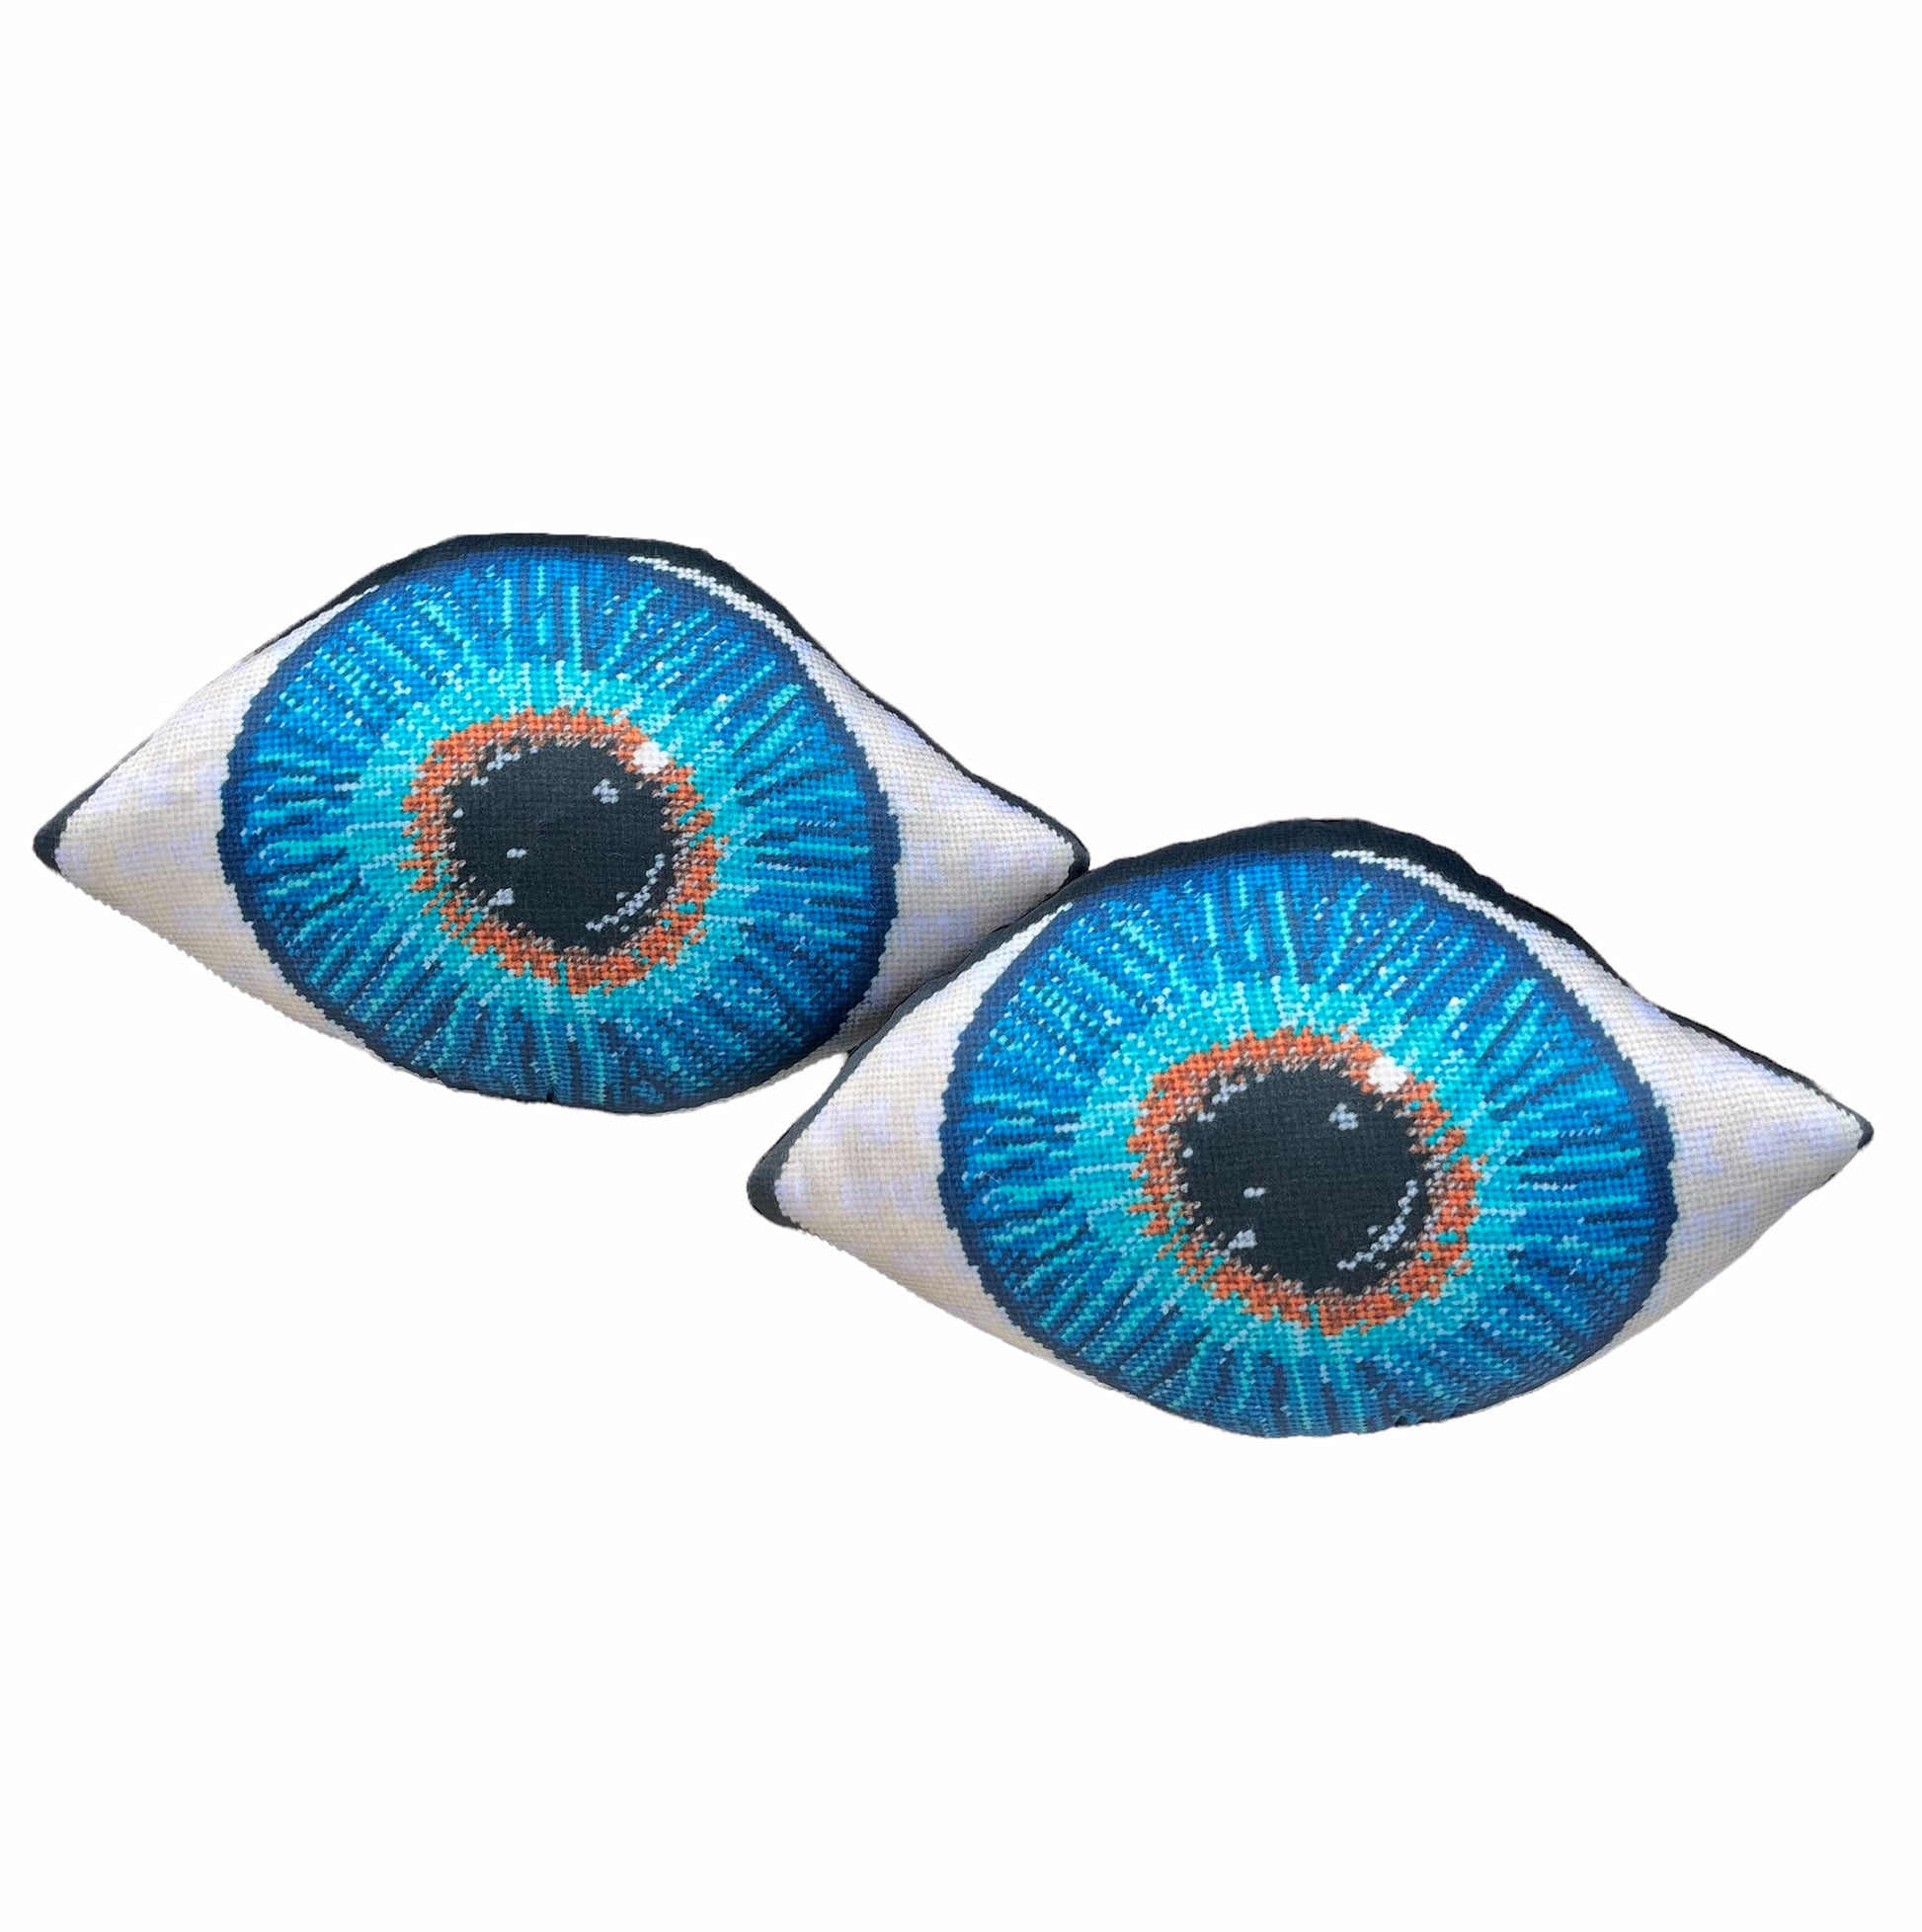 blue eye sculpted pillow has gold in center, turning to turquoise, then deep blues - very detailed